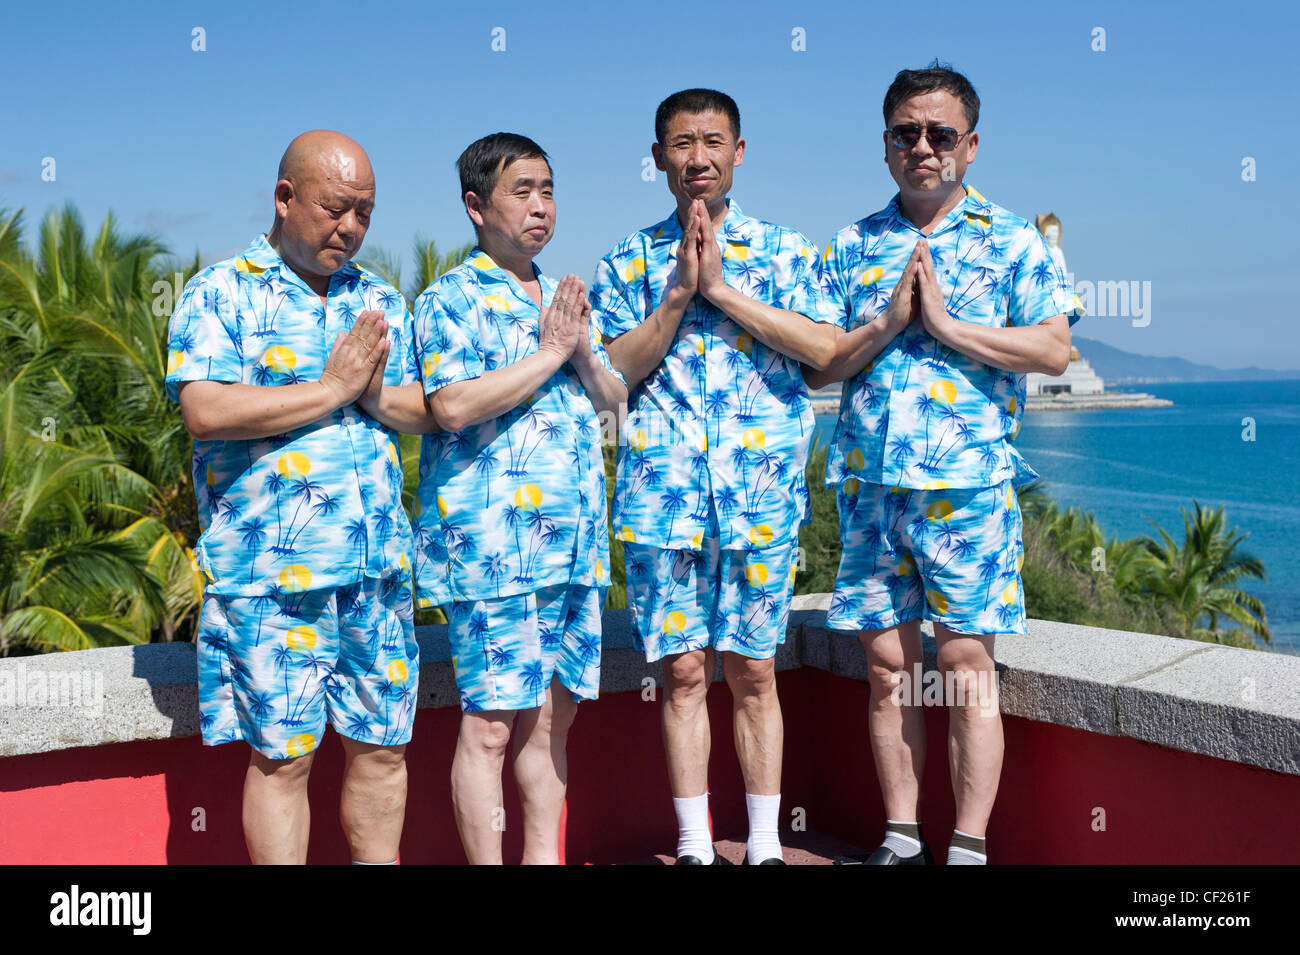 Matching Shorts High Resolution Stock Photography and Images - Alamy